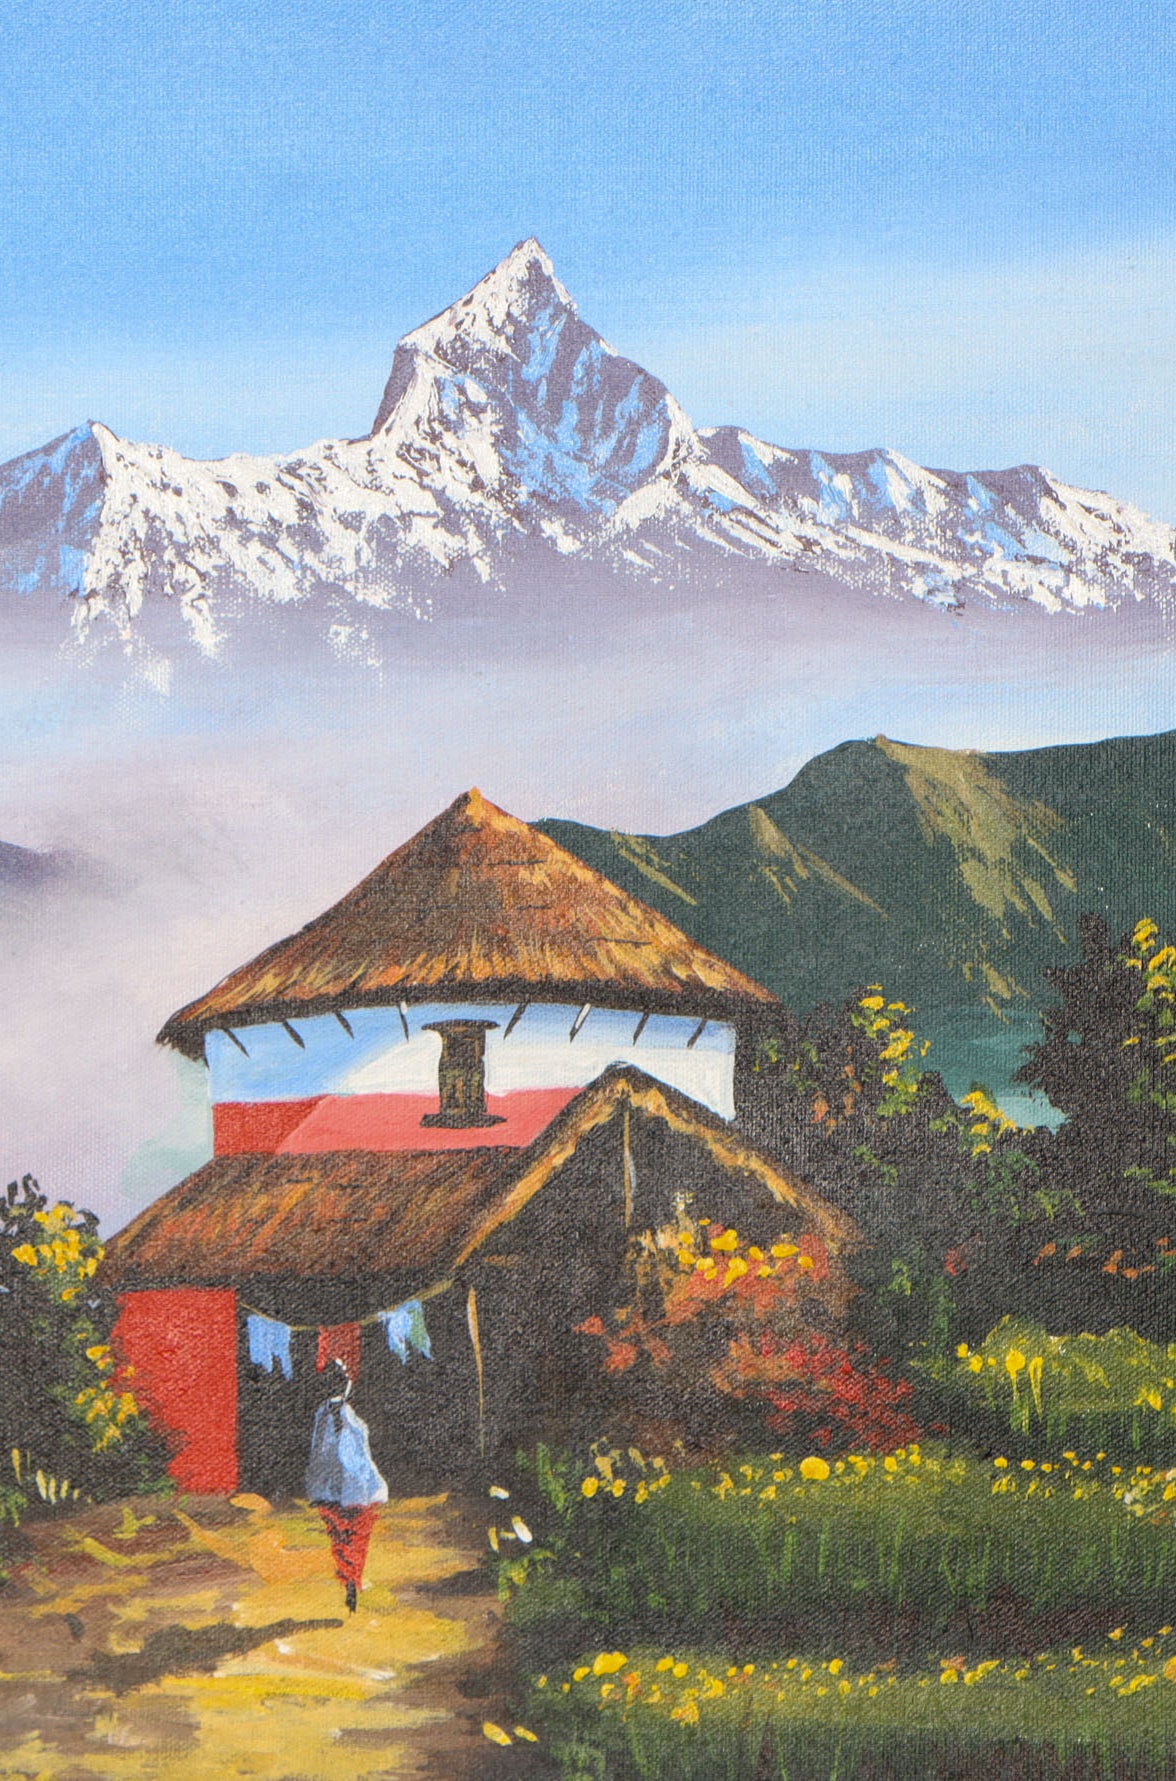 Oil Painting of Ama Dablam Mountain Range for wall decor.